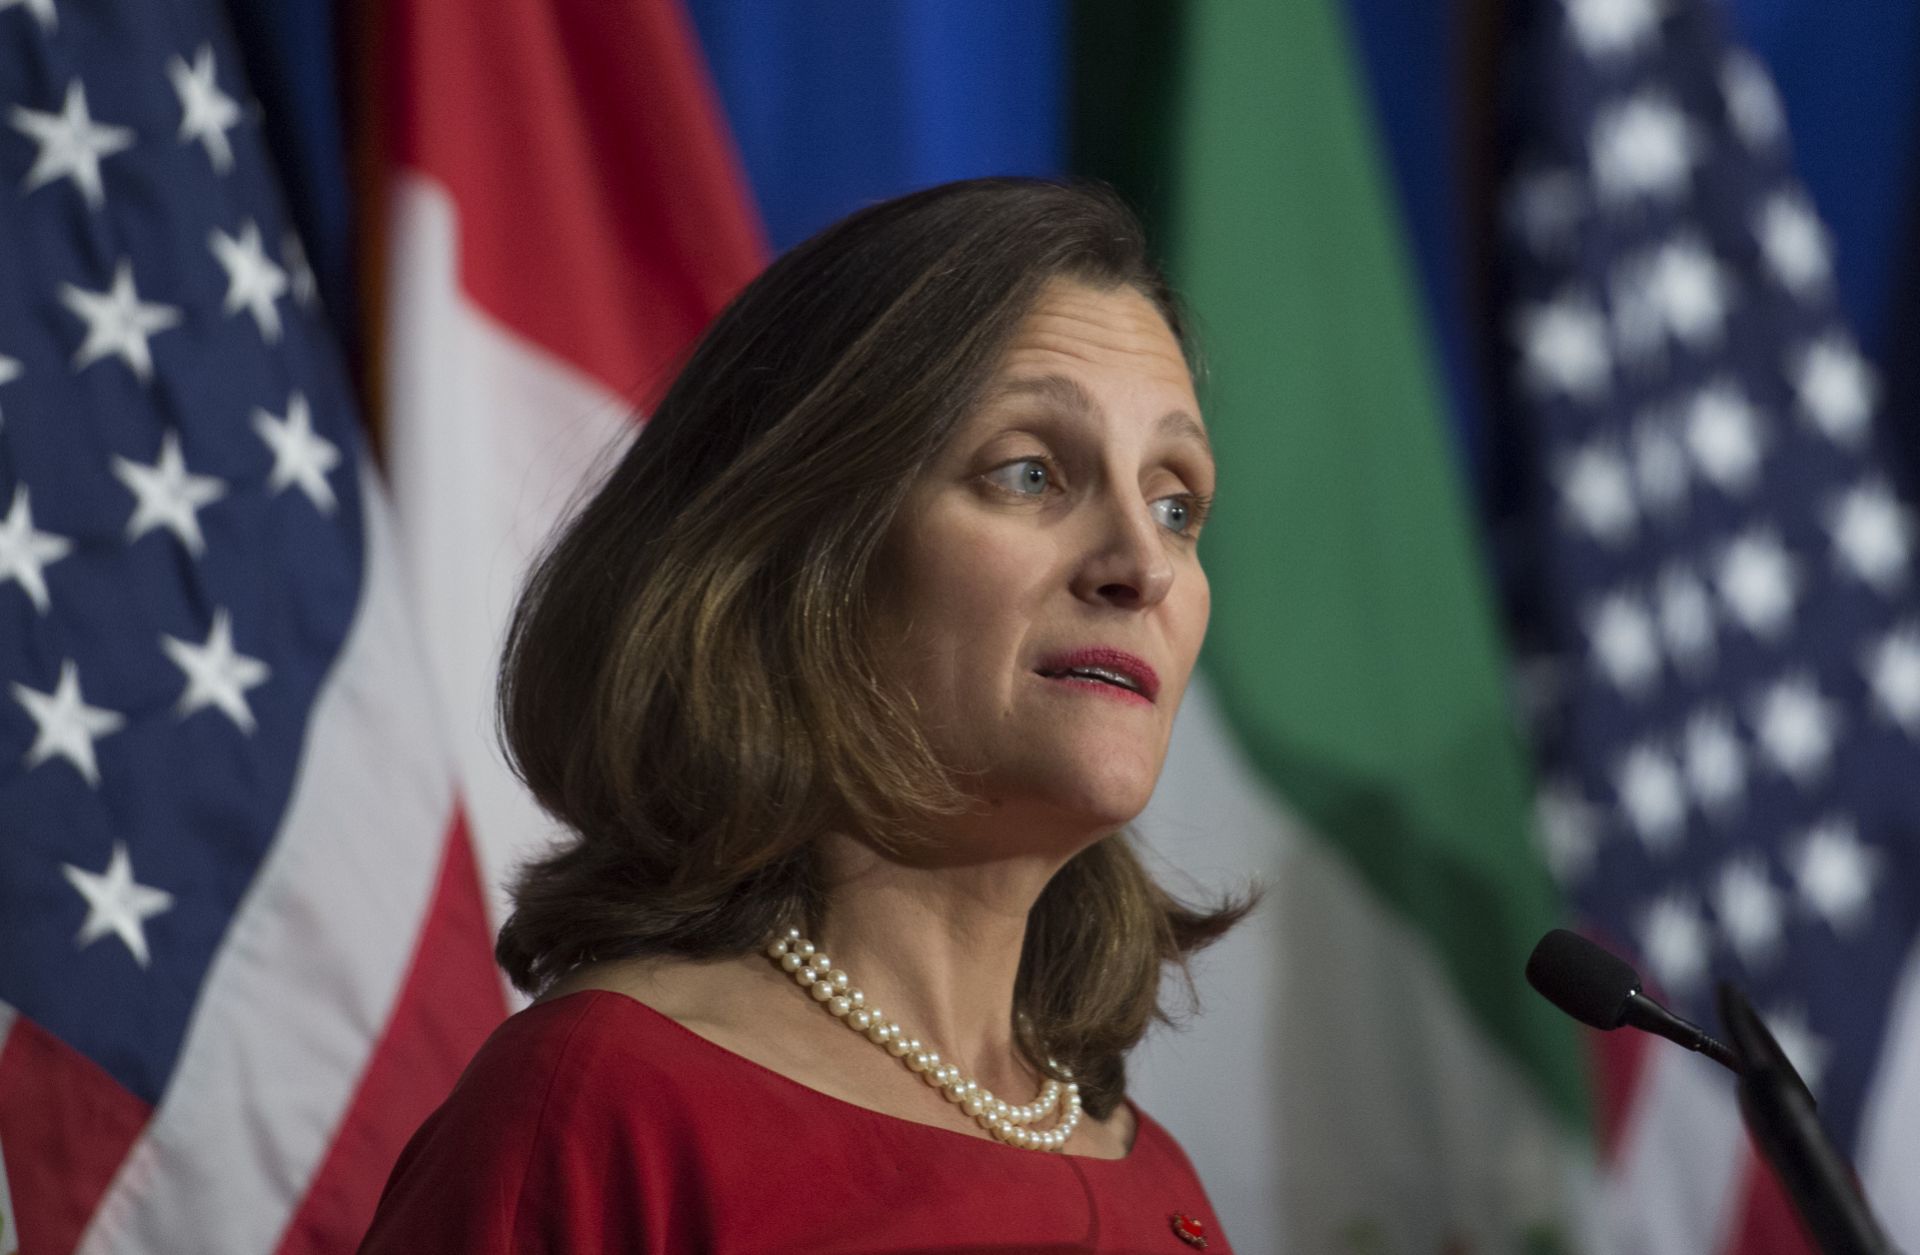 Canadian Foreign Minister Chrystia Freeland speaks during a press conference at the conclusion of the fourth round of negotiations for a new North American Free Trade Agreement (NAFTA) in 2017. Canada's trade case against U.S. trade remedy measures in the World Trade Organization will be at the forefront of global pushback against Washington's protectionist trade agenda.